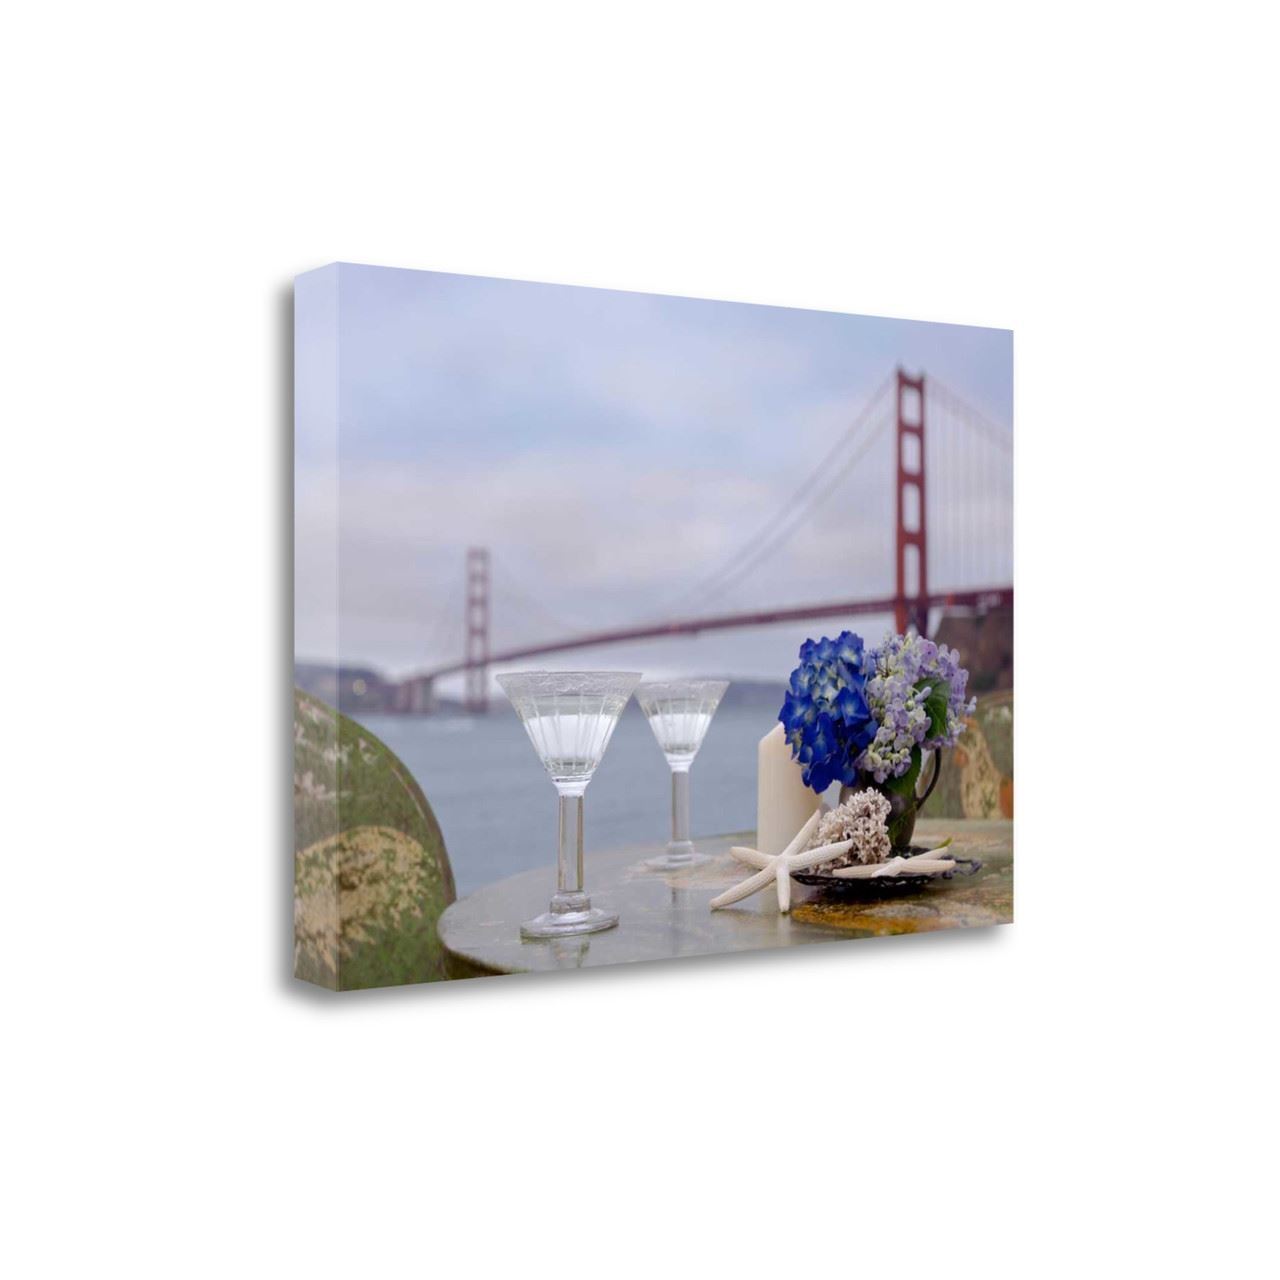 Up Close Beach Style Brunch For Two Golden Gate 4 Bridge Giclee Wrap Canvas Wall